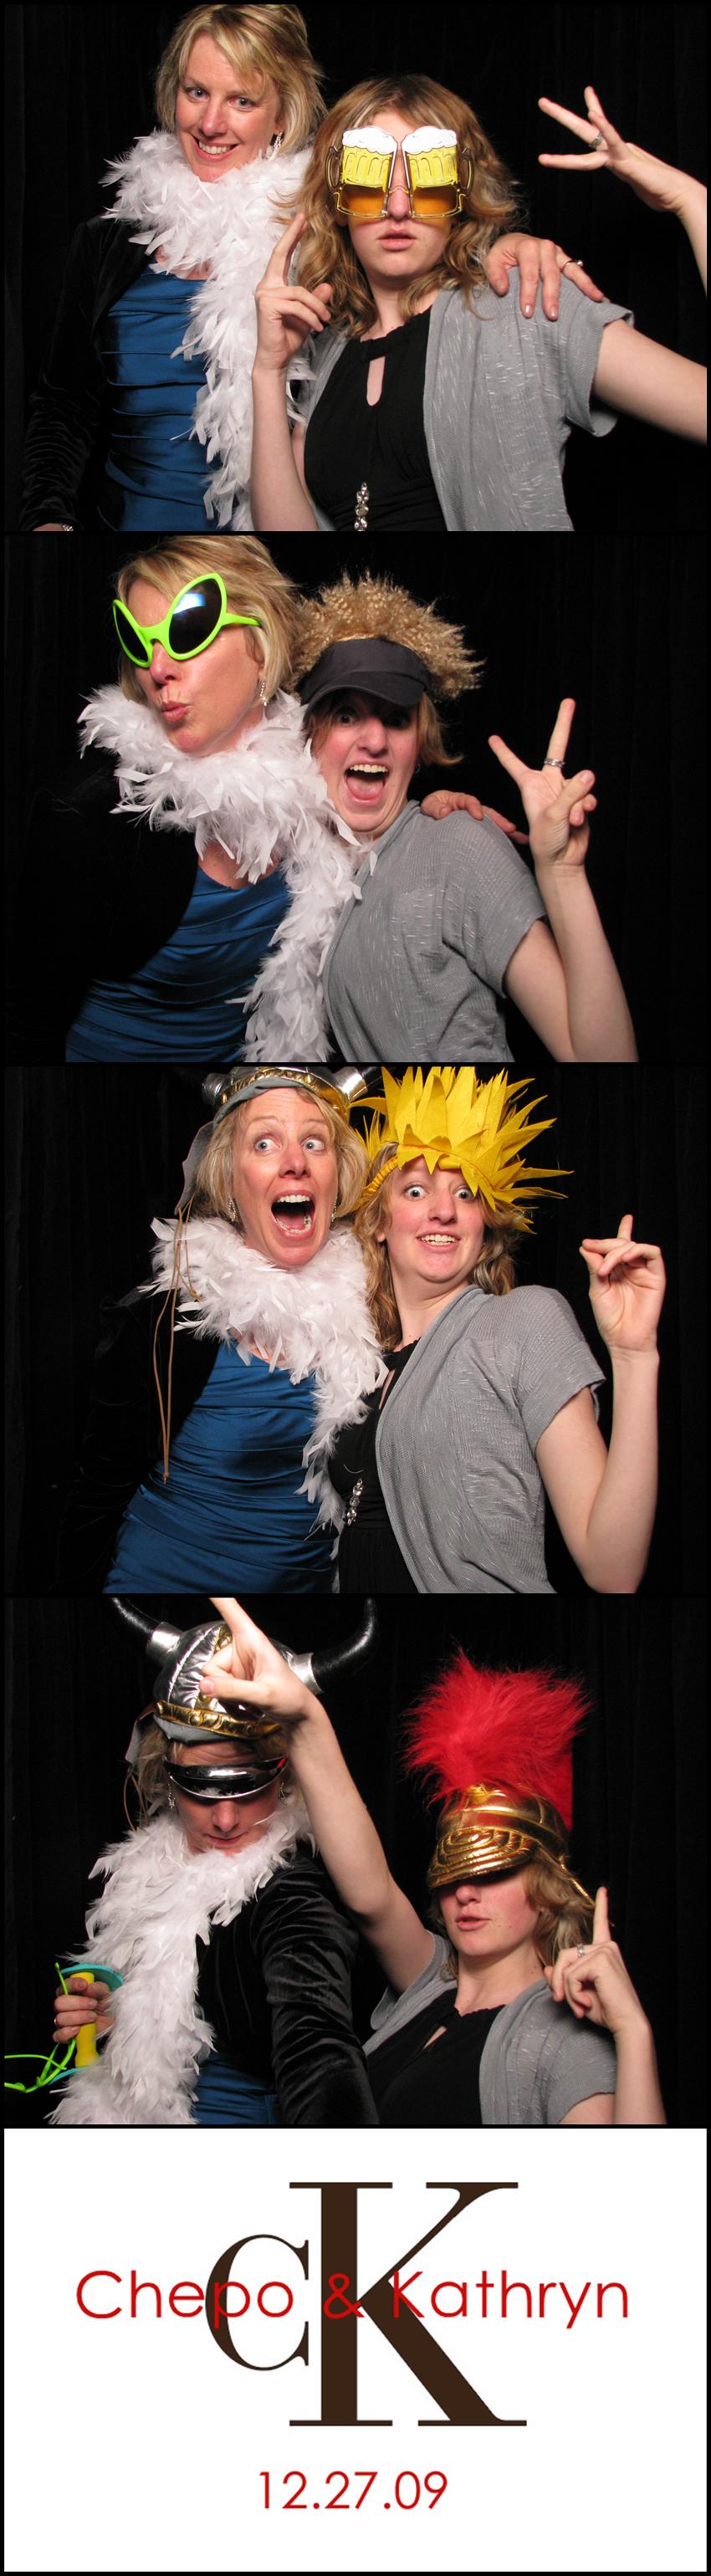 awesome photobooth picture CA